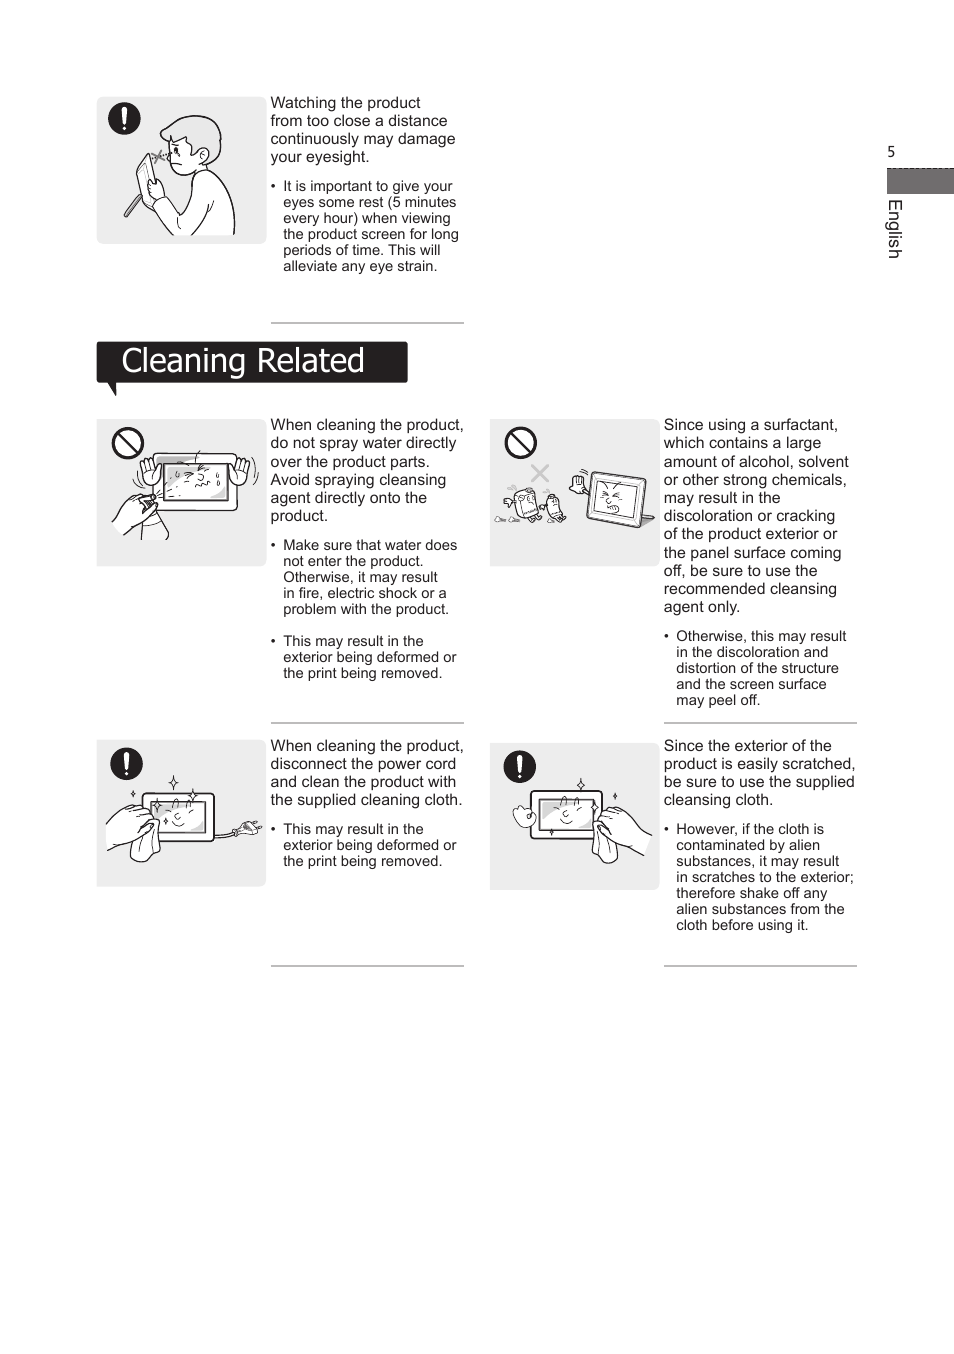 Cleaning related | Samsung LP07TSLSBT-ZA User Manual | Page 6 / 13